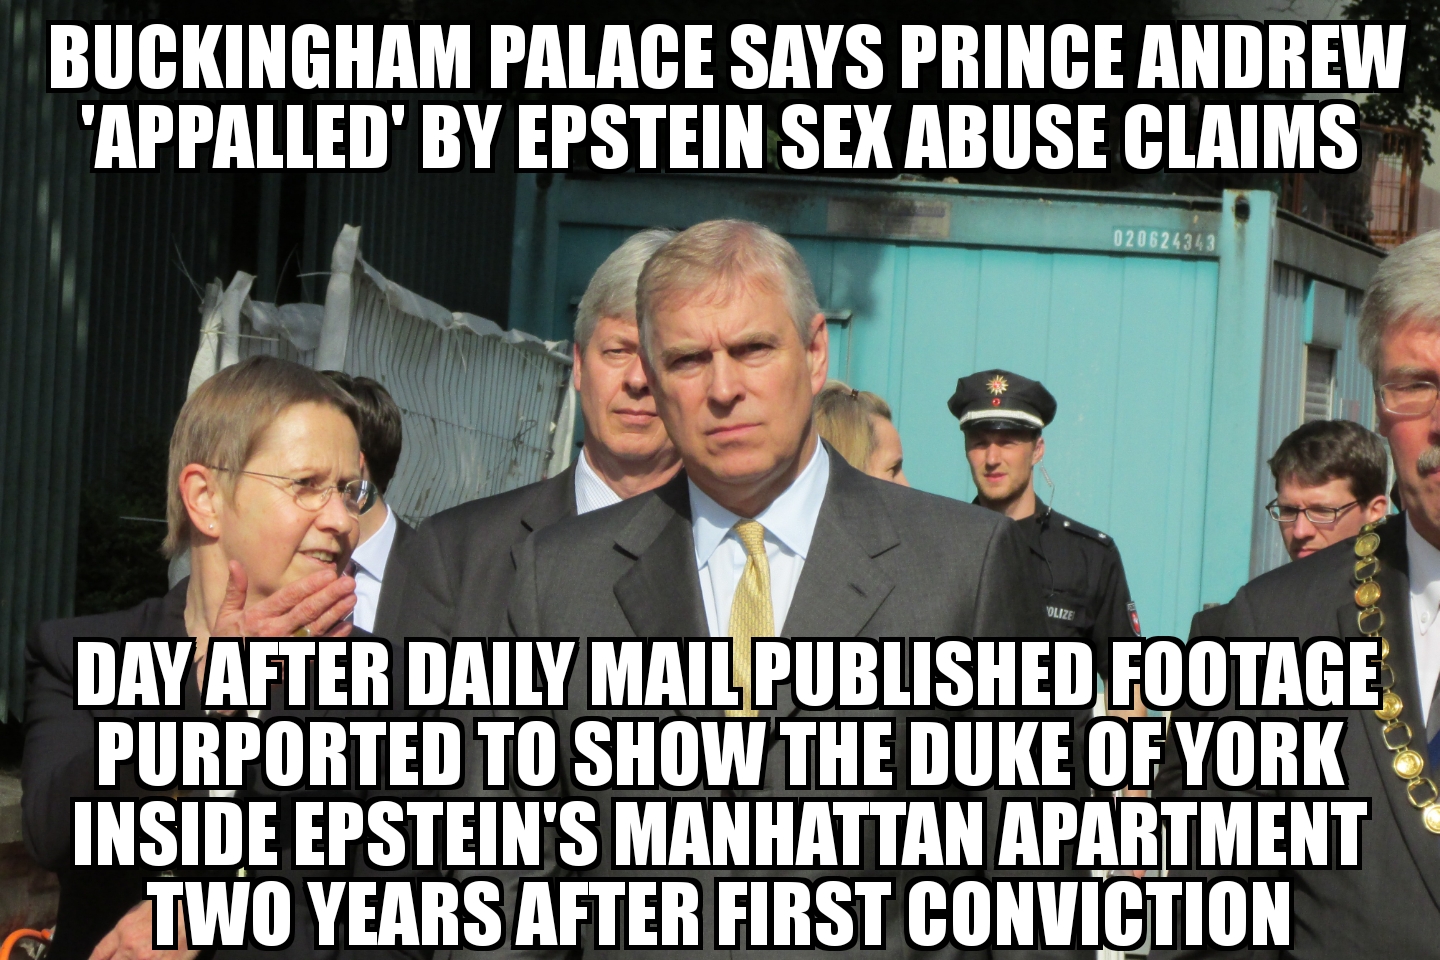 Prince Andrew ‘appalled’ by Epstein abuse claims